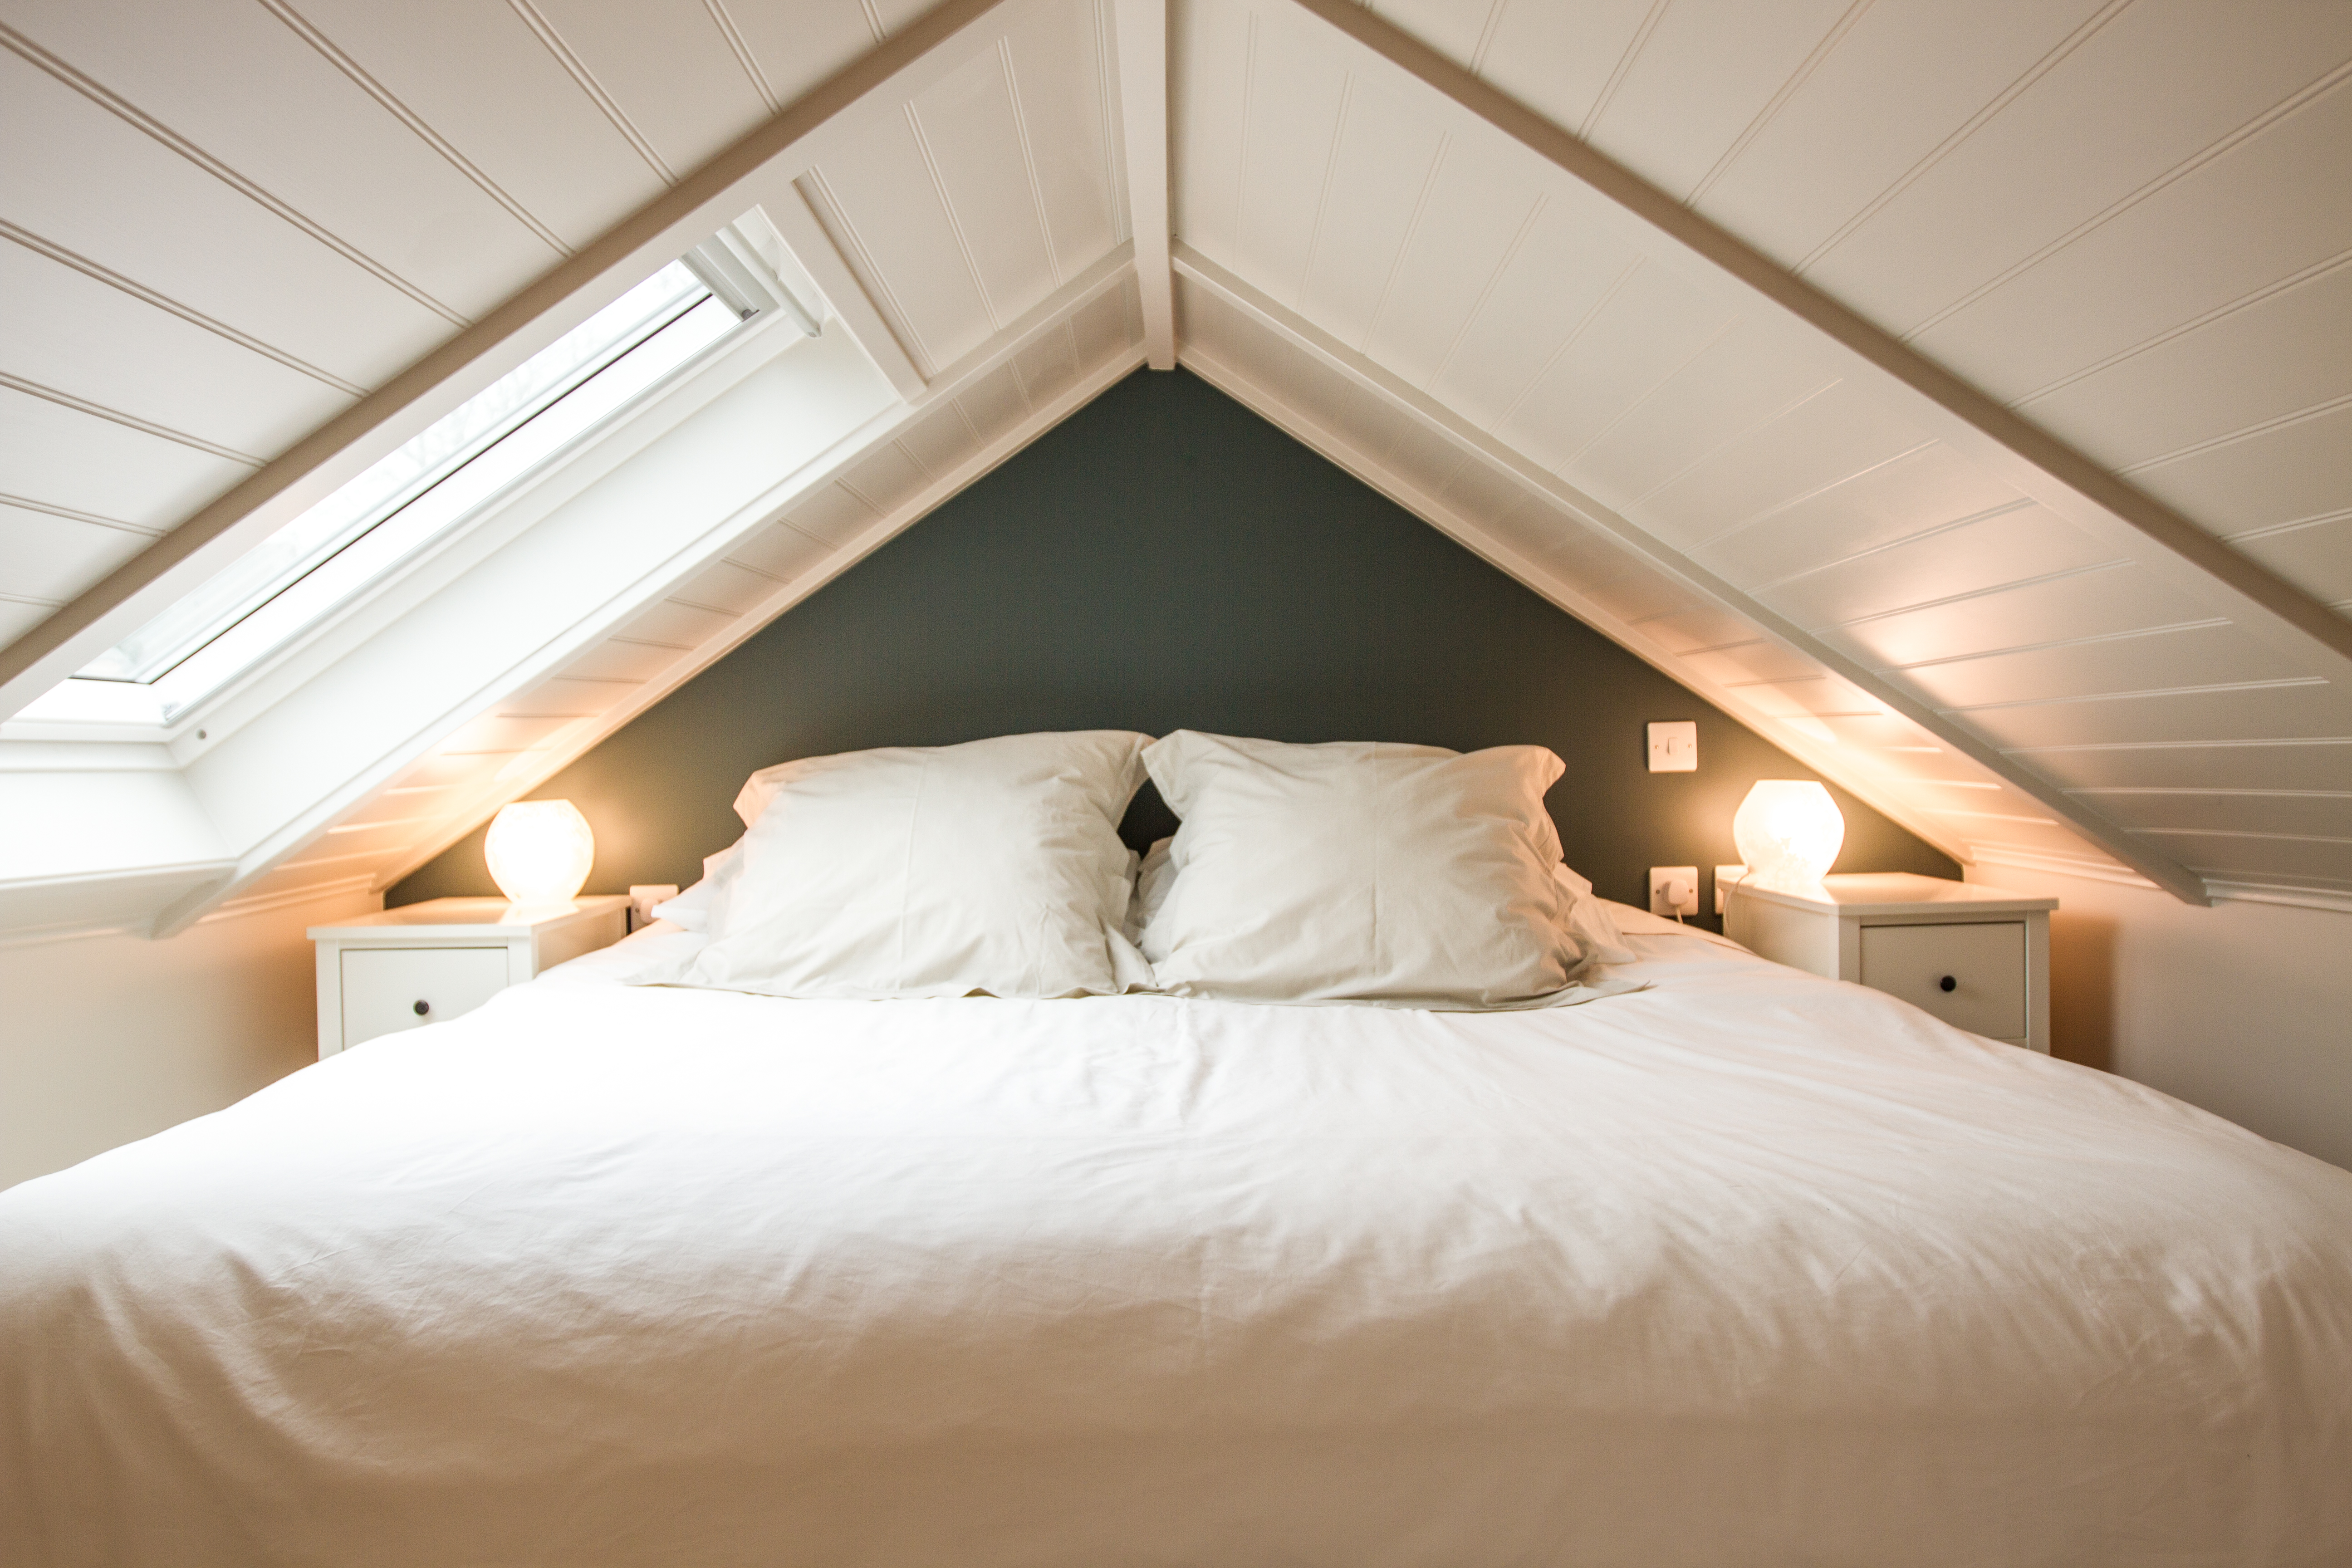 Bedroom in an attic space of a garage conversion by Aquila Property Group